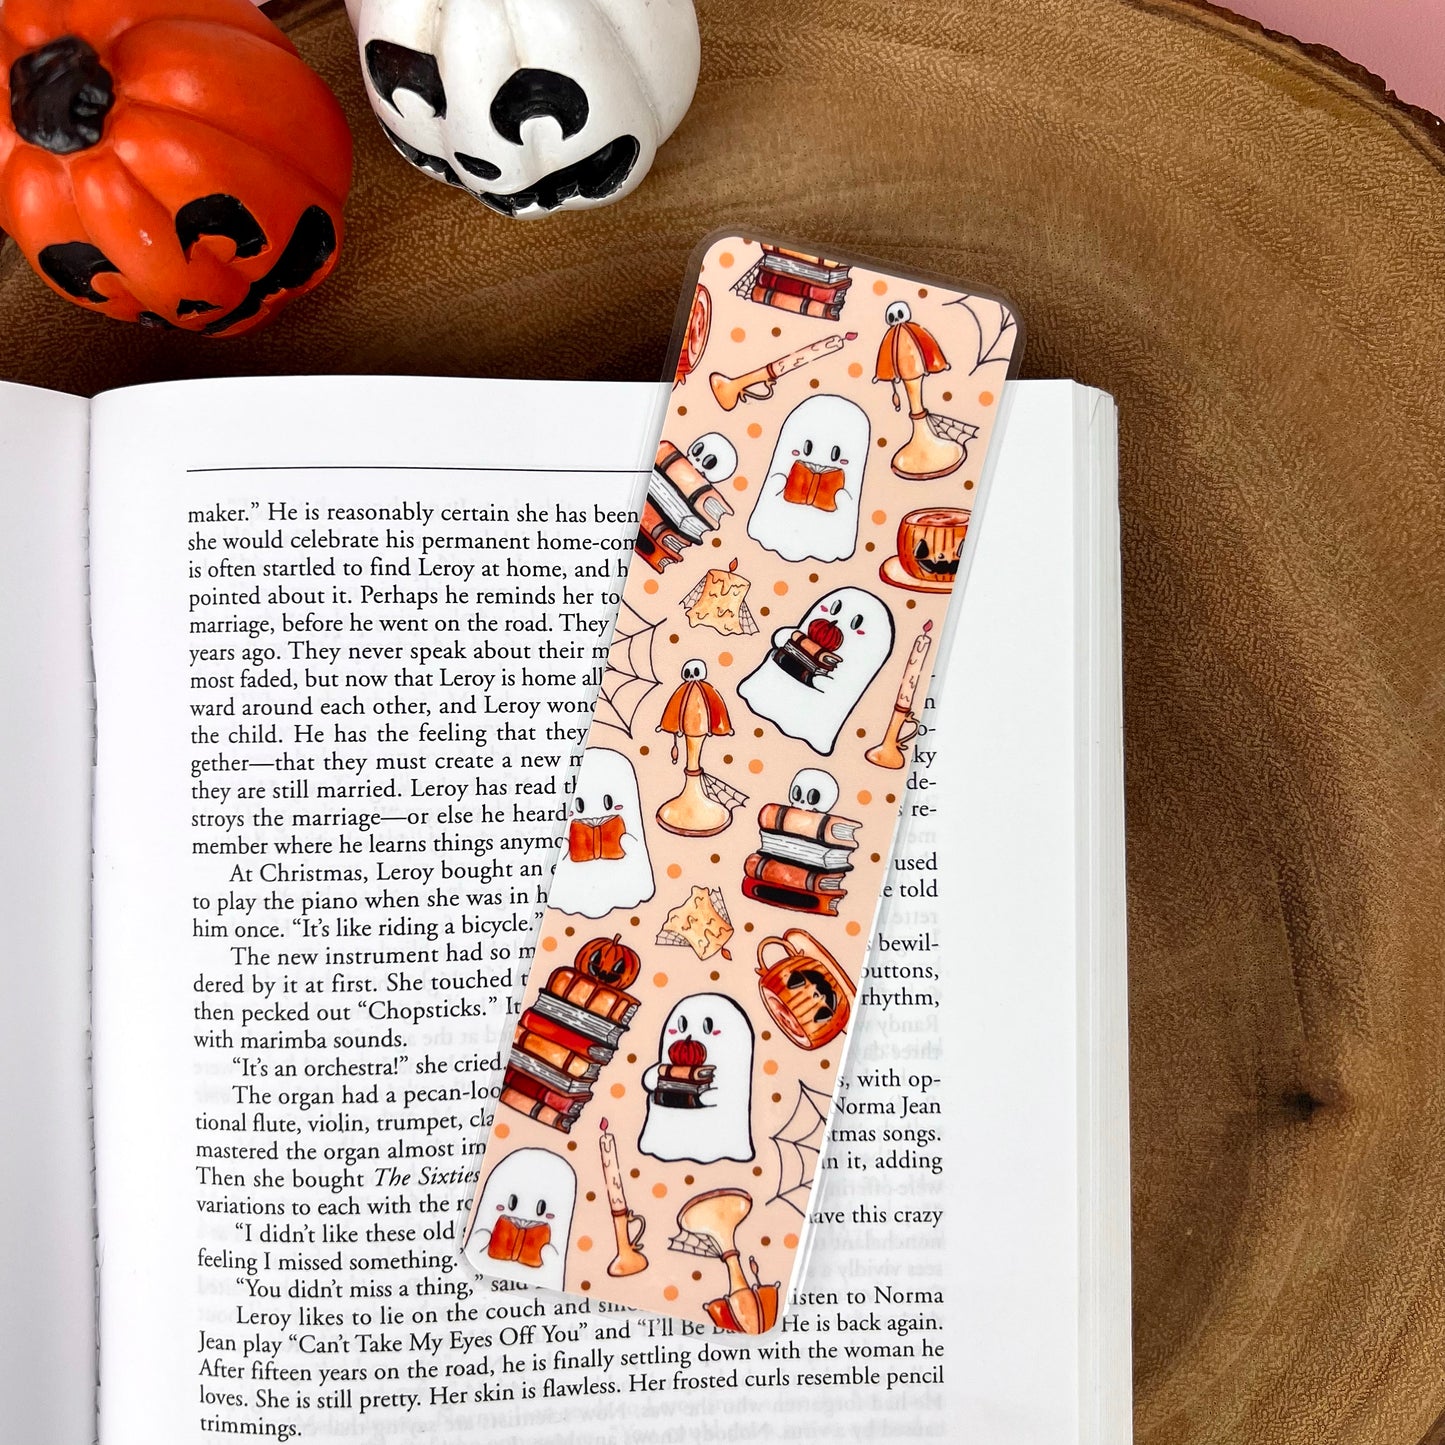 Haunted Library Bookmark